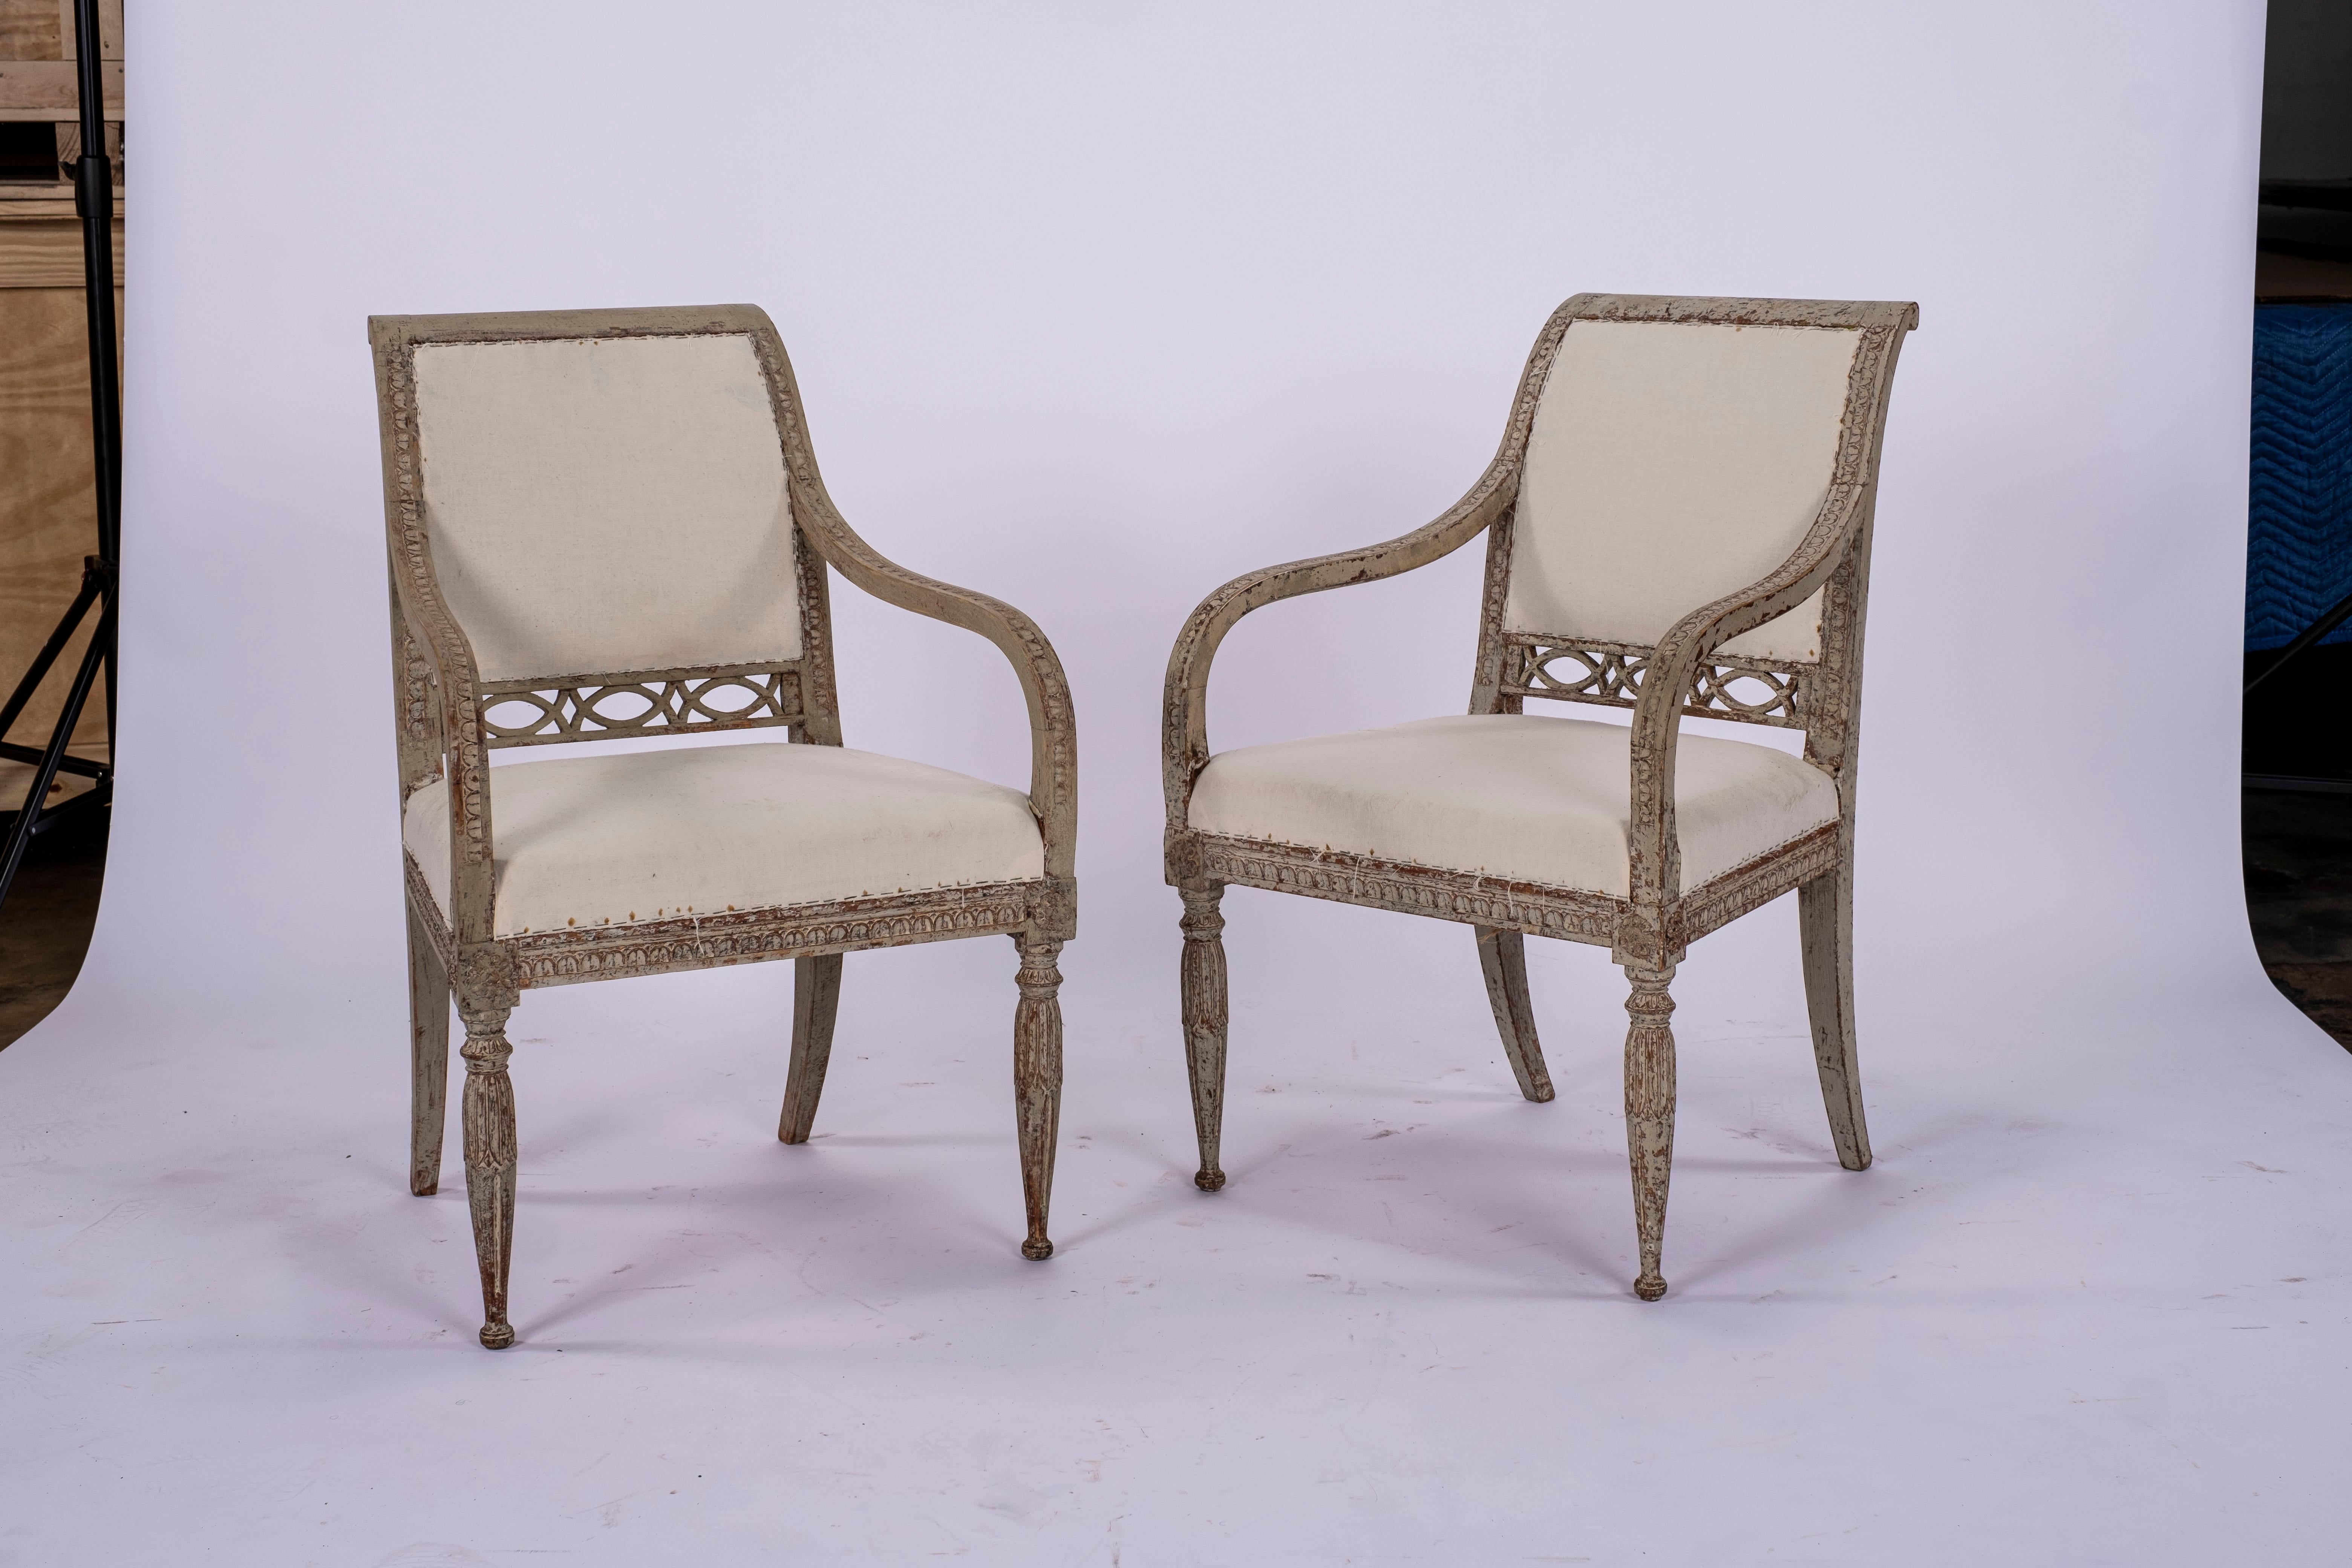 Pair of Gustavian armchairs. Ready for upholstered seat and back. Beautiful fretwork on back section. Carved detail throughout the frame with fluted tapering legs in the front and sloping klismos legs in the back..

Measures: Seat depth: 17